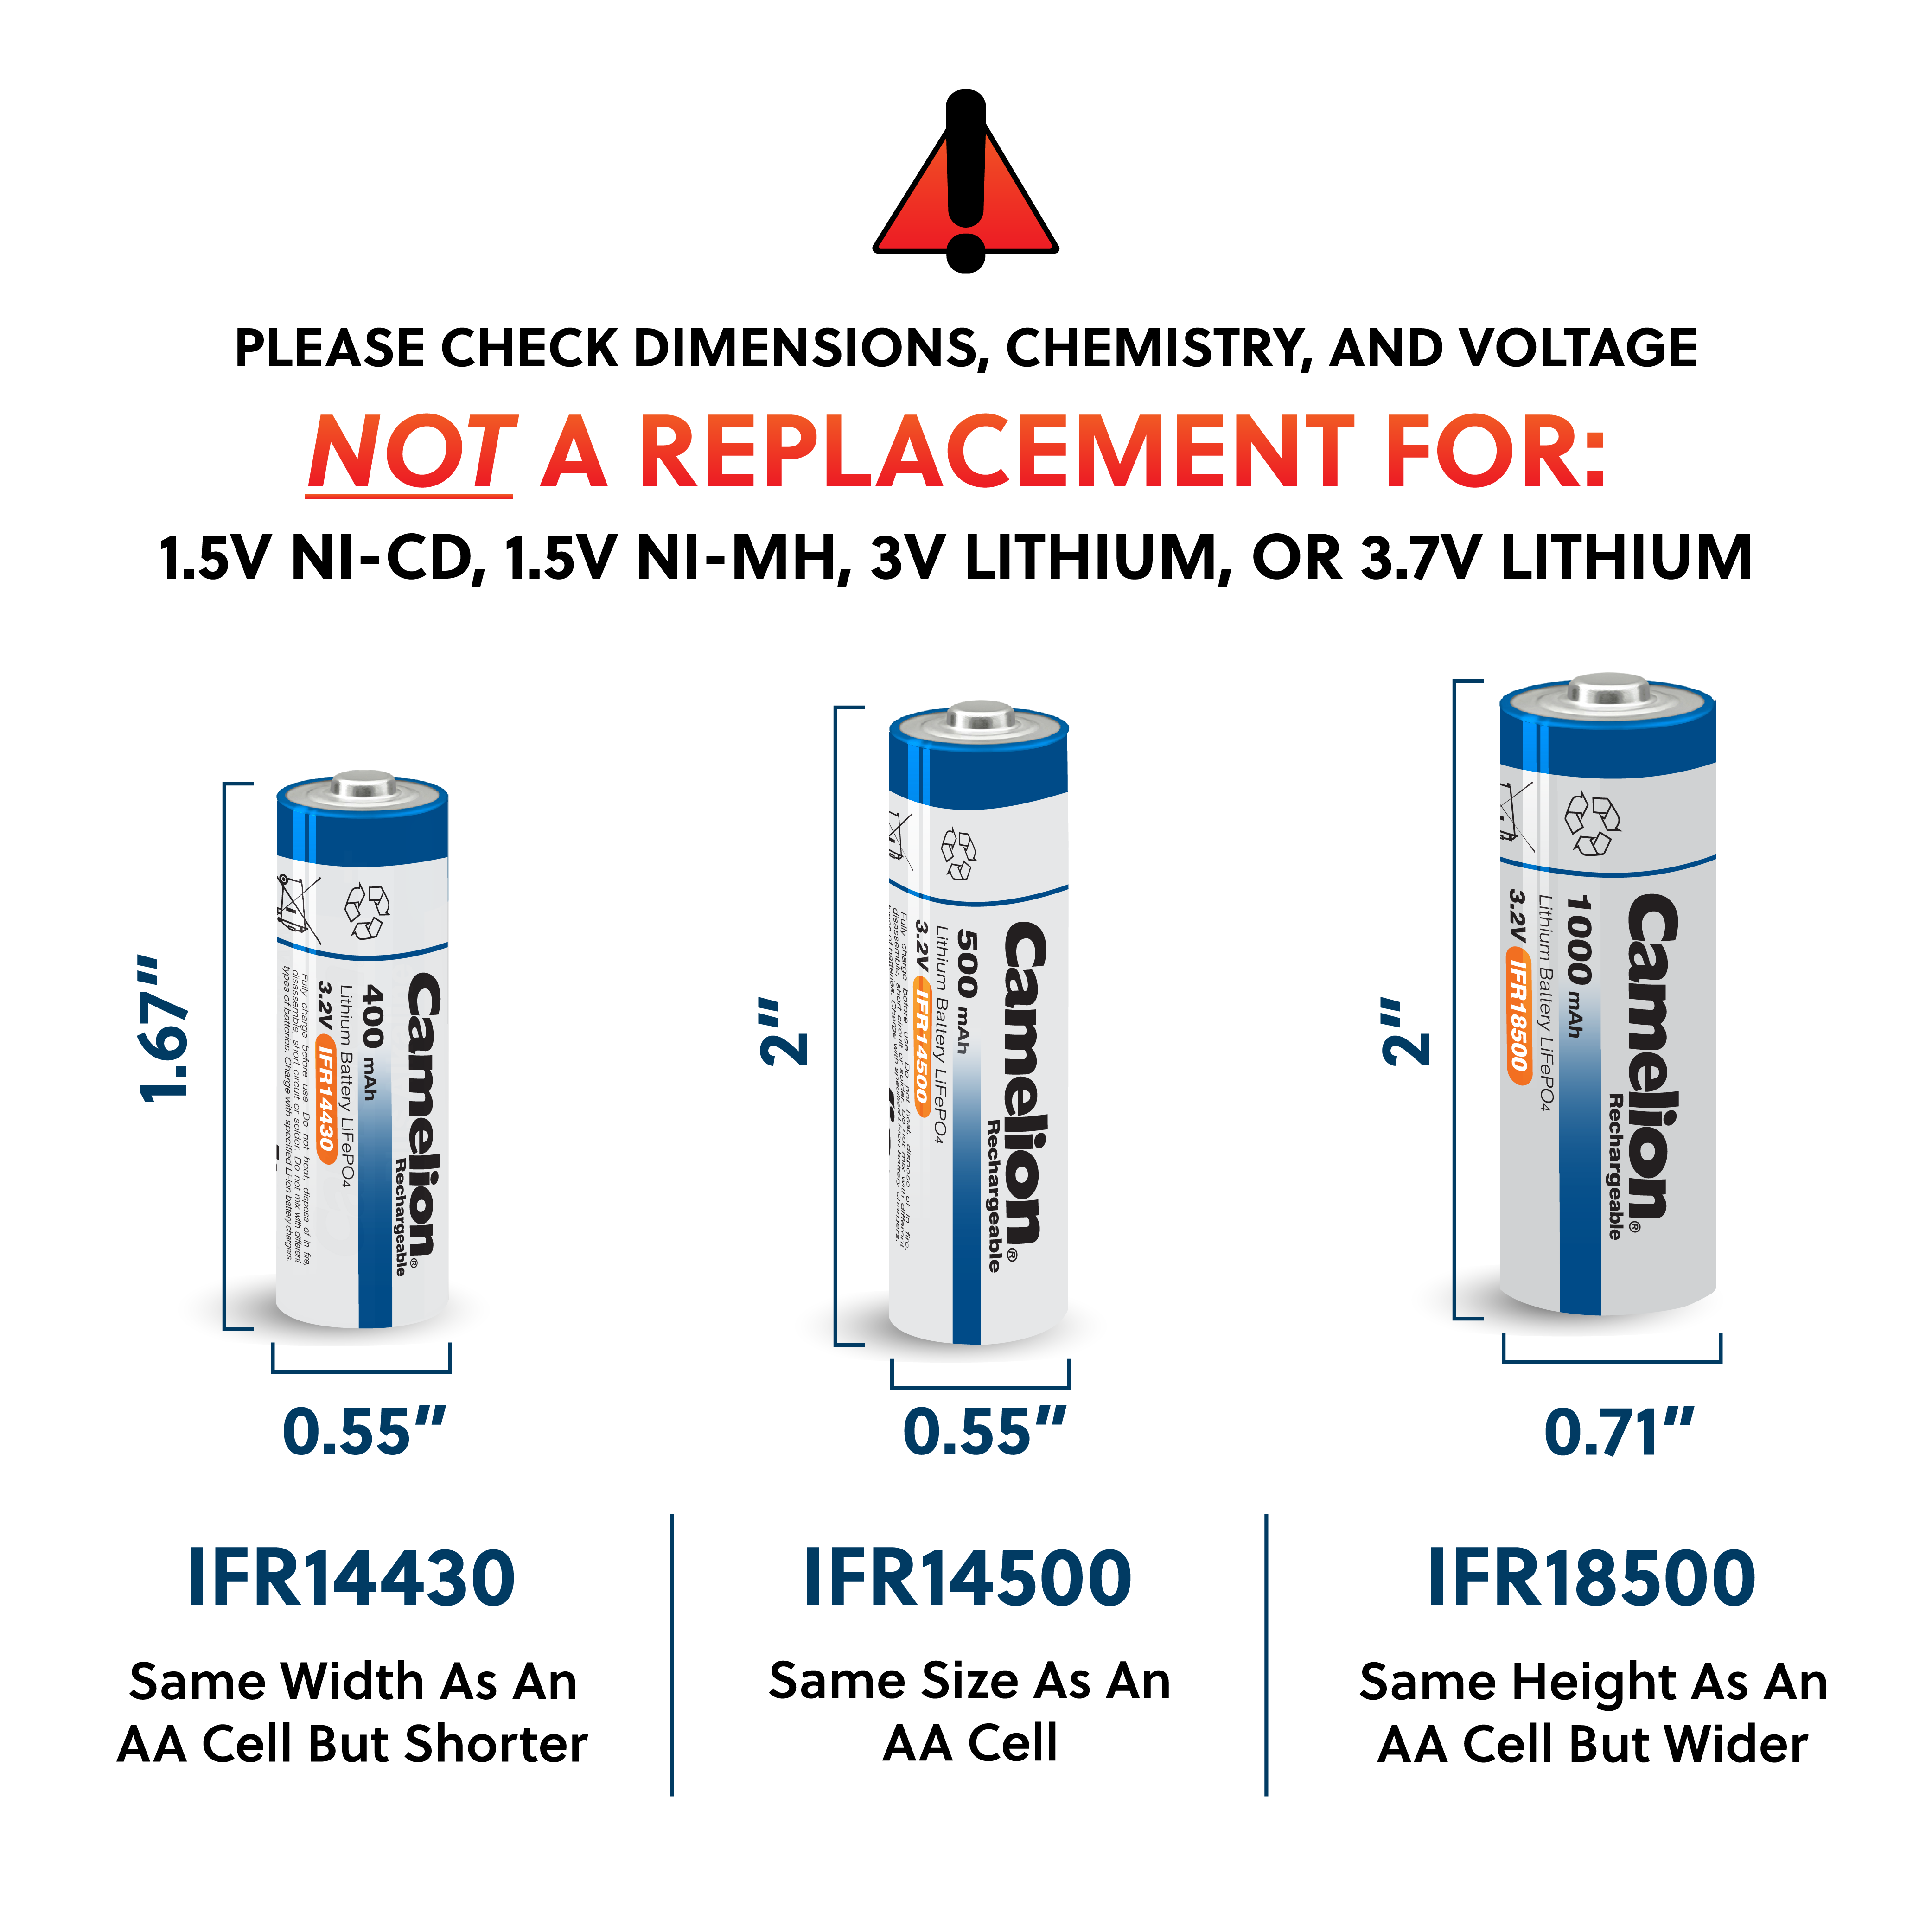 Camelion IFR18500 Lithium Iron Phosphate Rechargeable Battery 1000mAh Blister Pack of 4